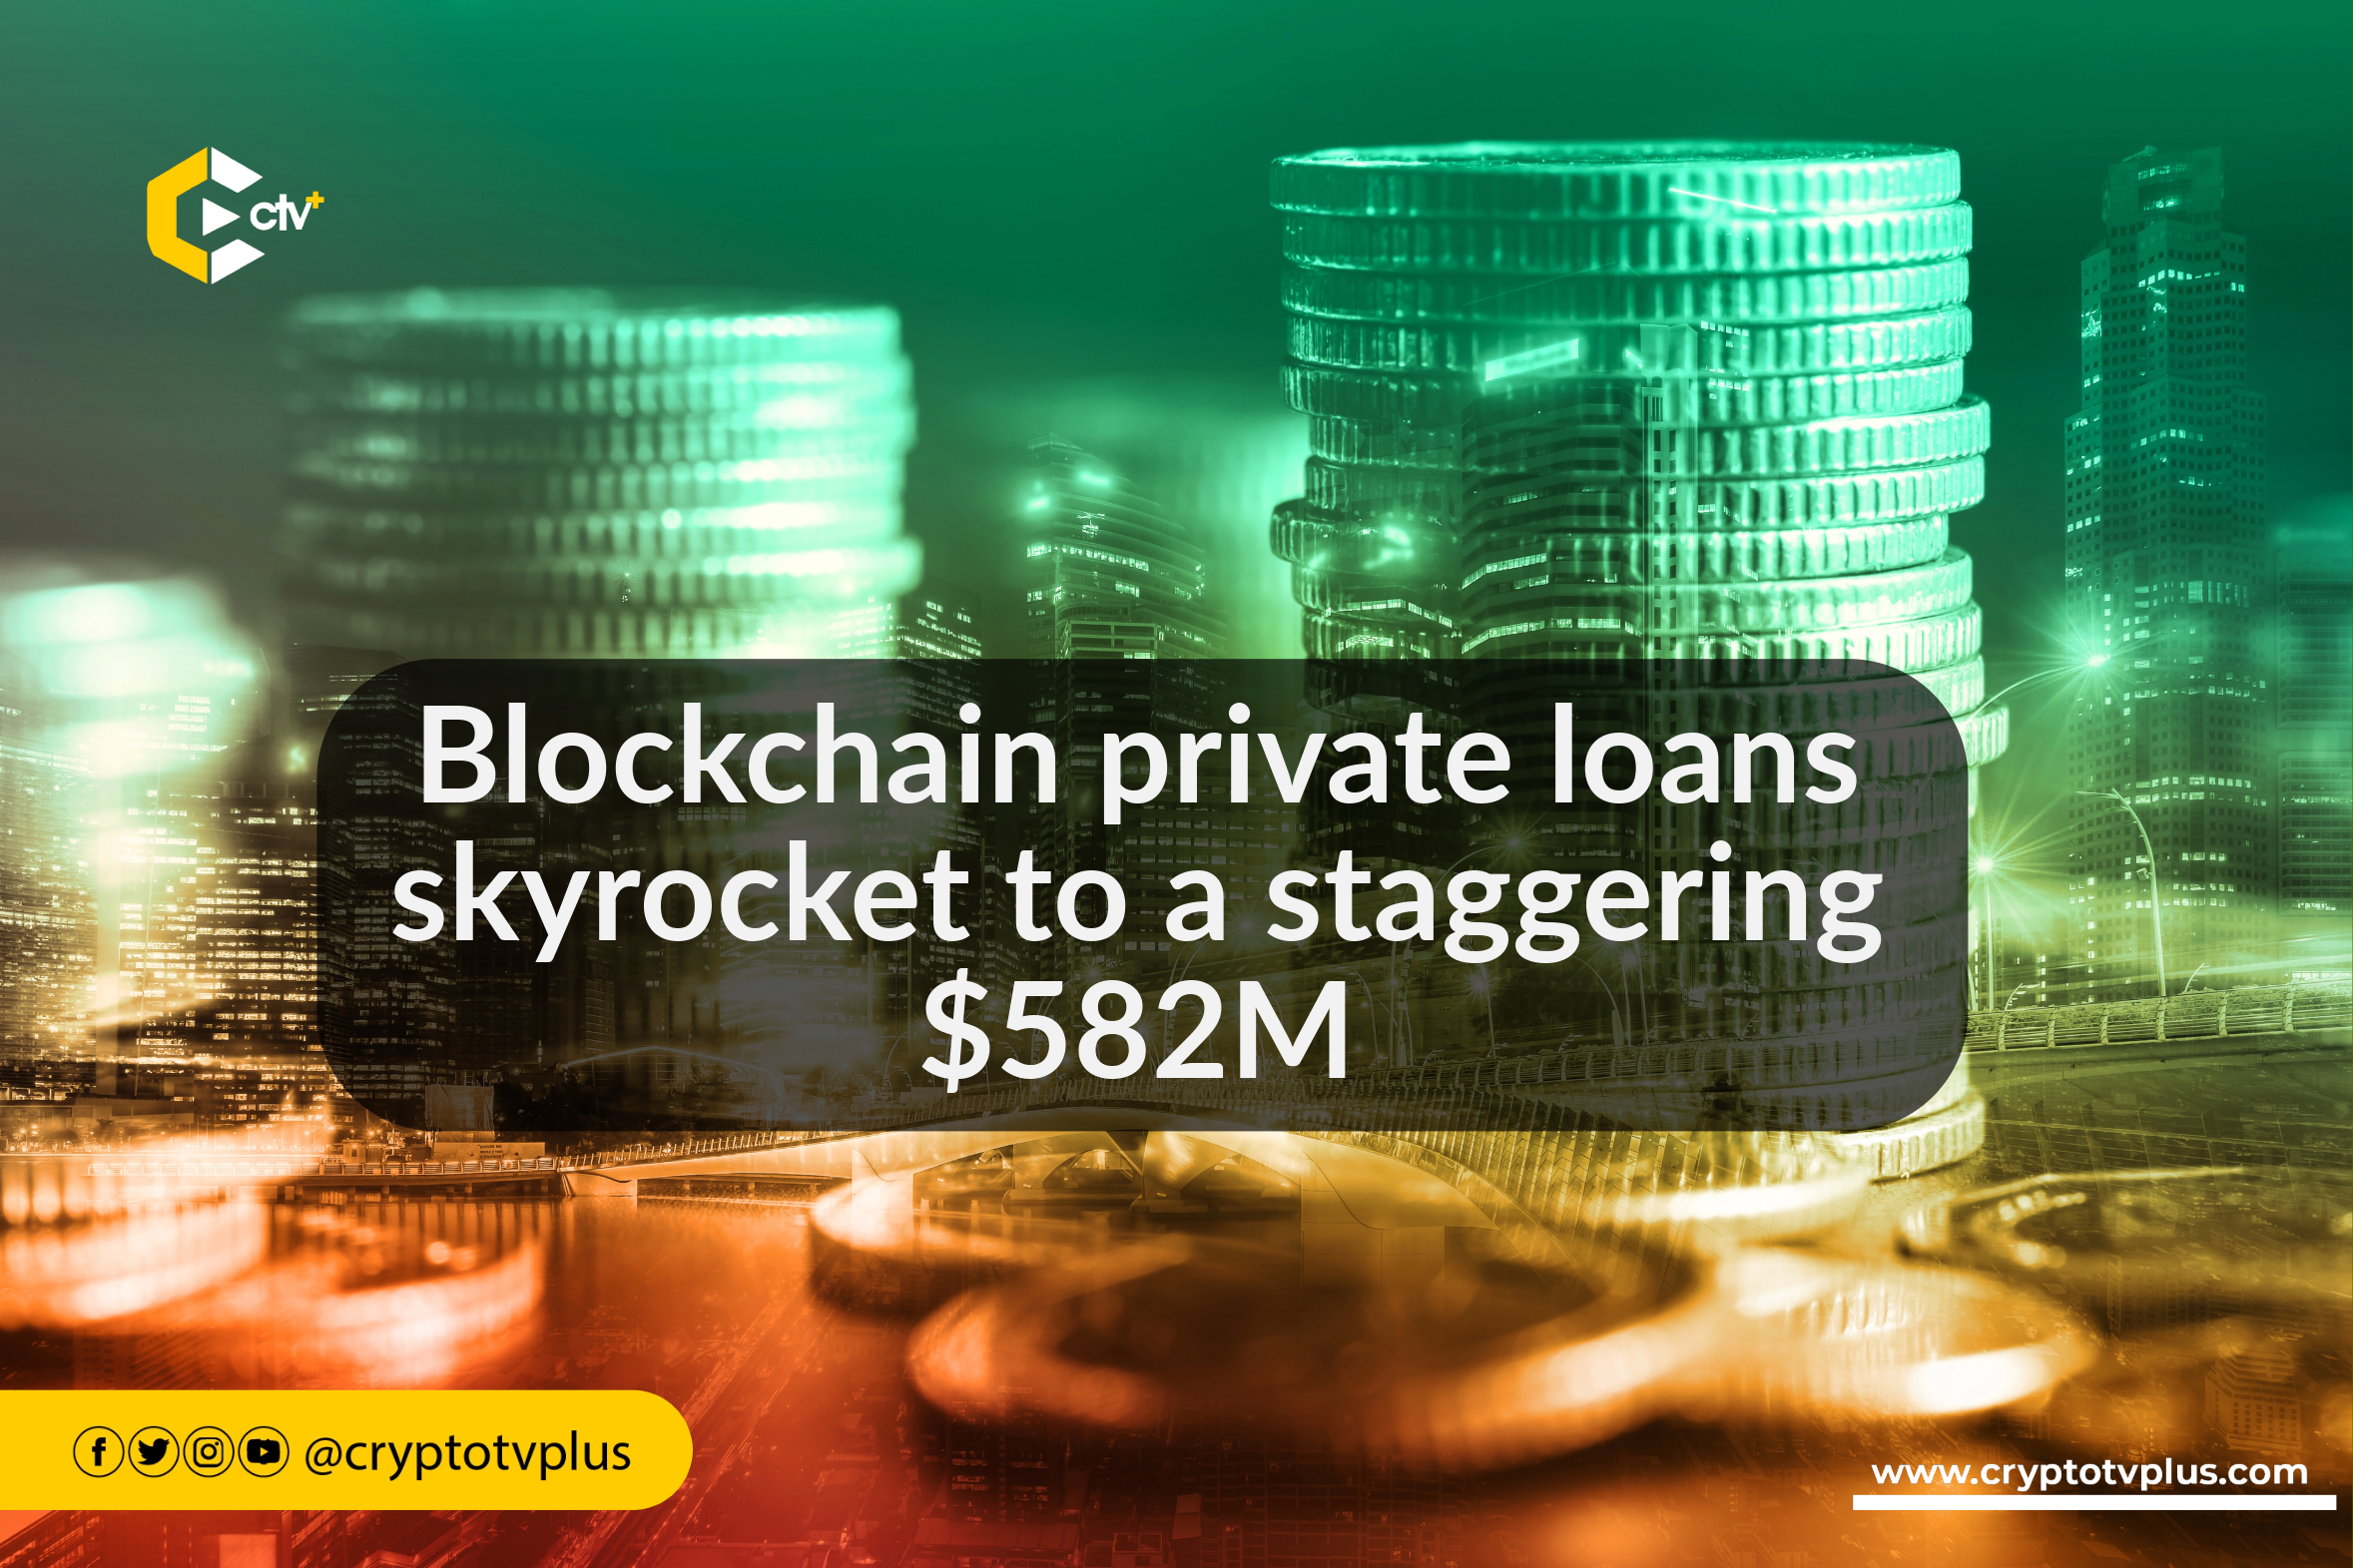 Blockchain private loans skyrocket to a staggering $582M